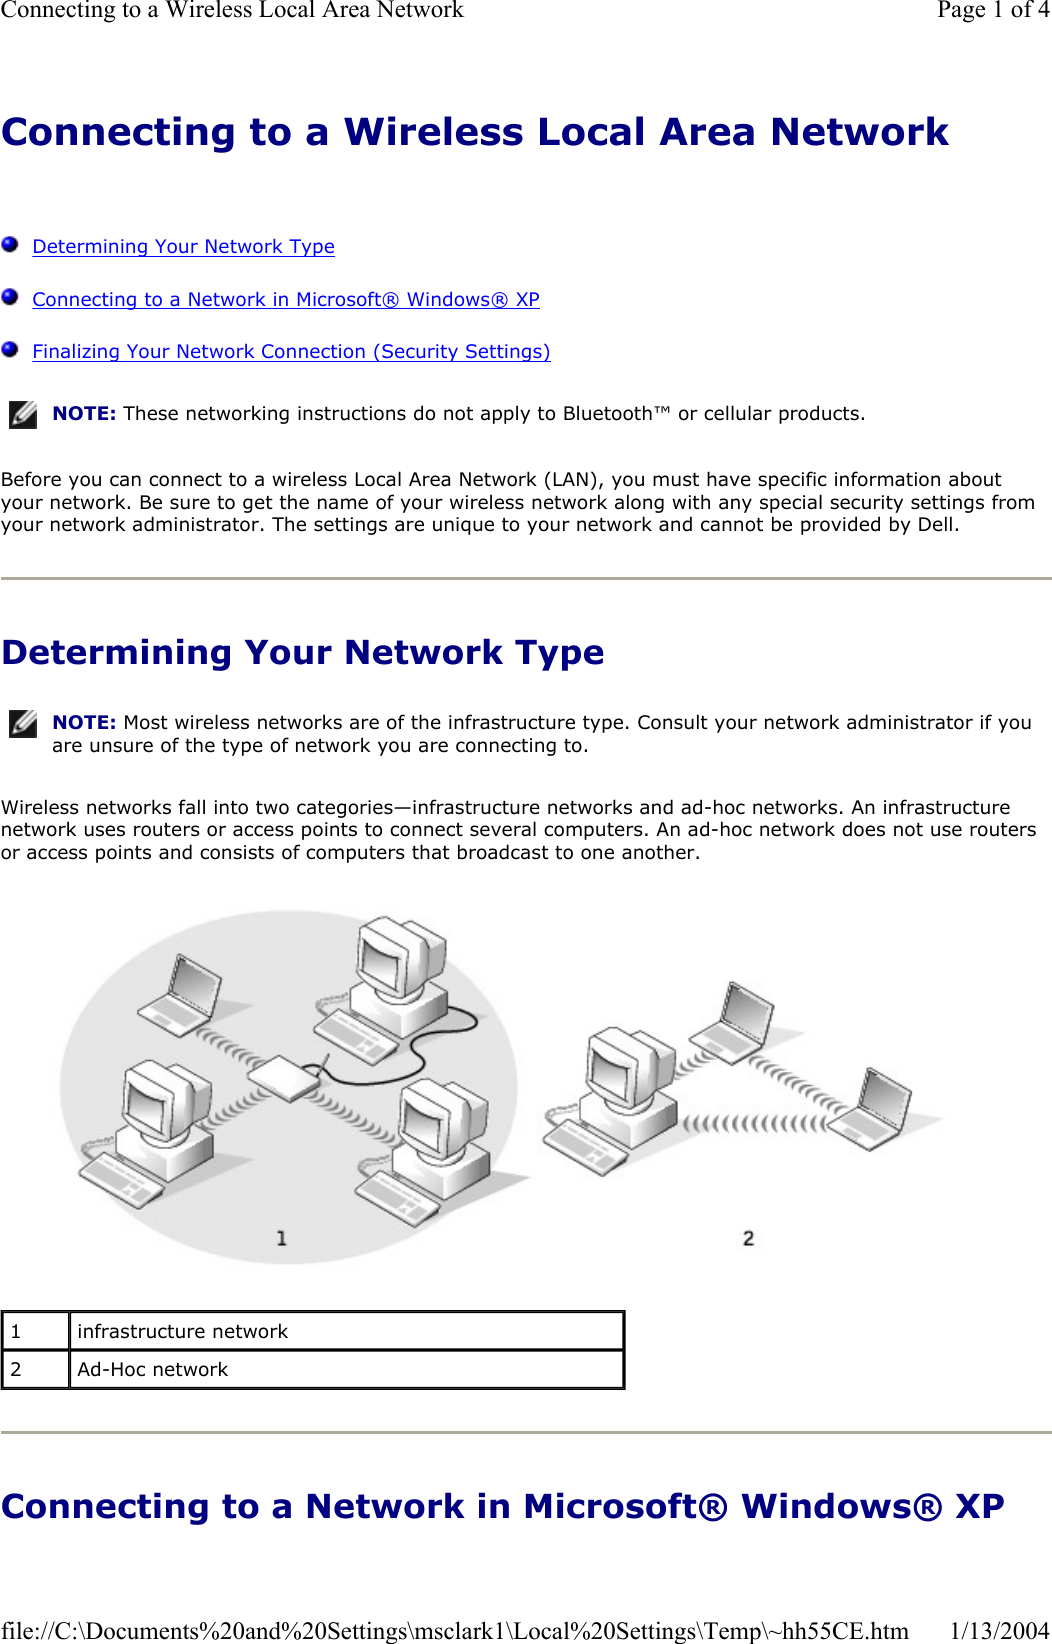 Connecting to a Wireless Local Area NetworkDetermining Your Network TypeConnecting to a Network in Microsoft®Windows®XPFinalizing Your Network Connection (Security Settings)Before you can connect to a wireless Local Area Network (LAN), you must have specific information about your network. Be sure to get the name of your wireless network along with any special security settings from your network administrator. The settings are unique to your network and cannot be provided by Dell.  Determining Your Network Type Wireless networks fall into two categories—infrastructure networks and ad-hoc networks. An infrastructure network uses routers or access points to connect several computers. An ad-hoc network does not use routers or access points and consists of computers that broadcast to one another. Connecting to a Network in Microsoft® Windows® XP NOTE: These networking instructions do not apply to Bluetooth™ or cellular products.NOTE: Most wireless networks are of the infrastructure type. Consult your network administrator if you are unsure of the type of network you are connecting to.1infrastructure network 2Ad-Hoc network Page 1 of 4Connecting to a Wireless Local Area Network1/13/2004file://C:\Documents%20and%20Settings\msclark1\Local%20Settings\Temp\~hh55CE.htm